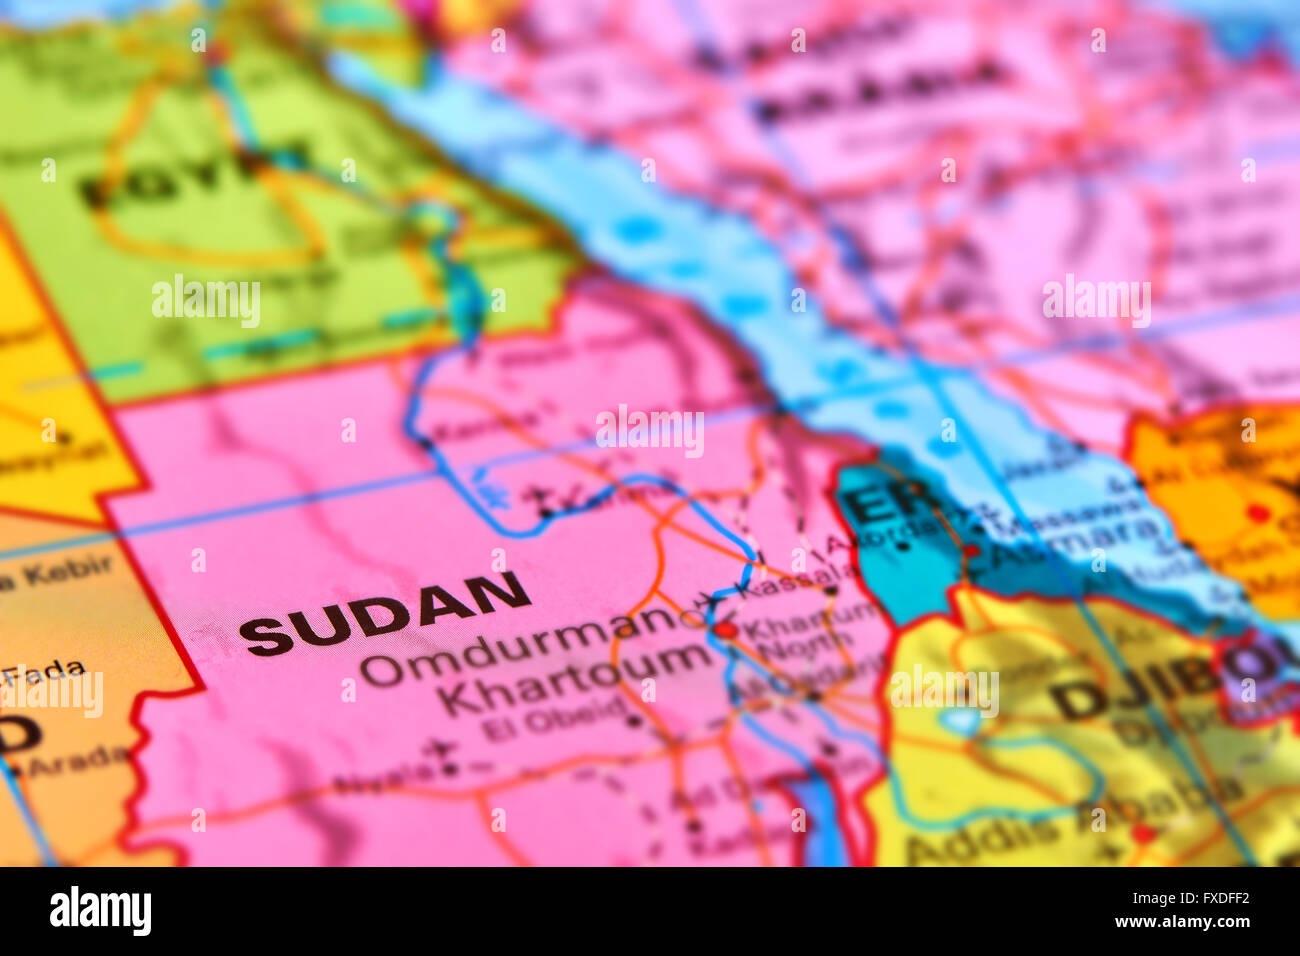 Sudan Country in Africa on the World Map Stock Photo